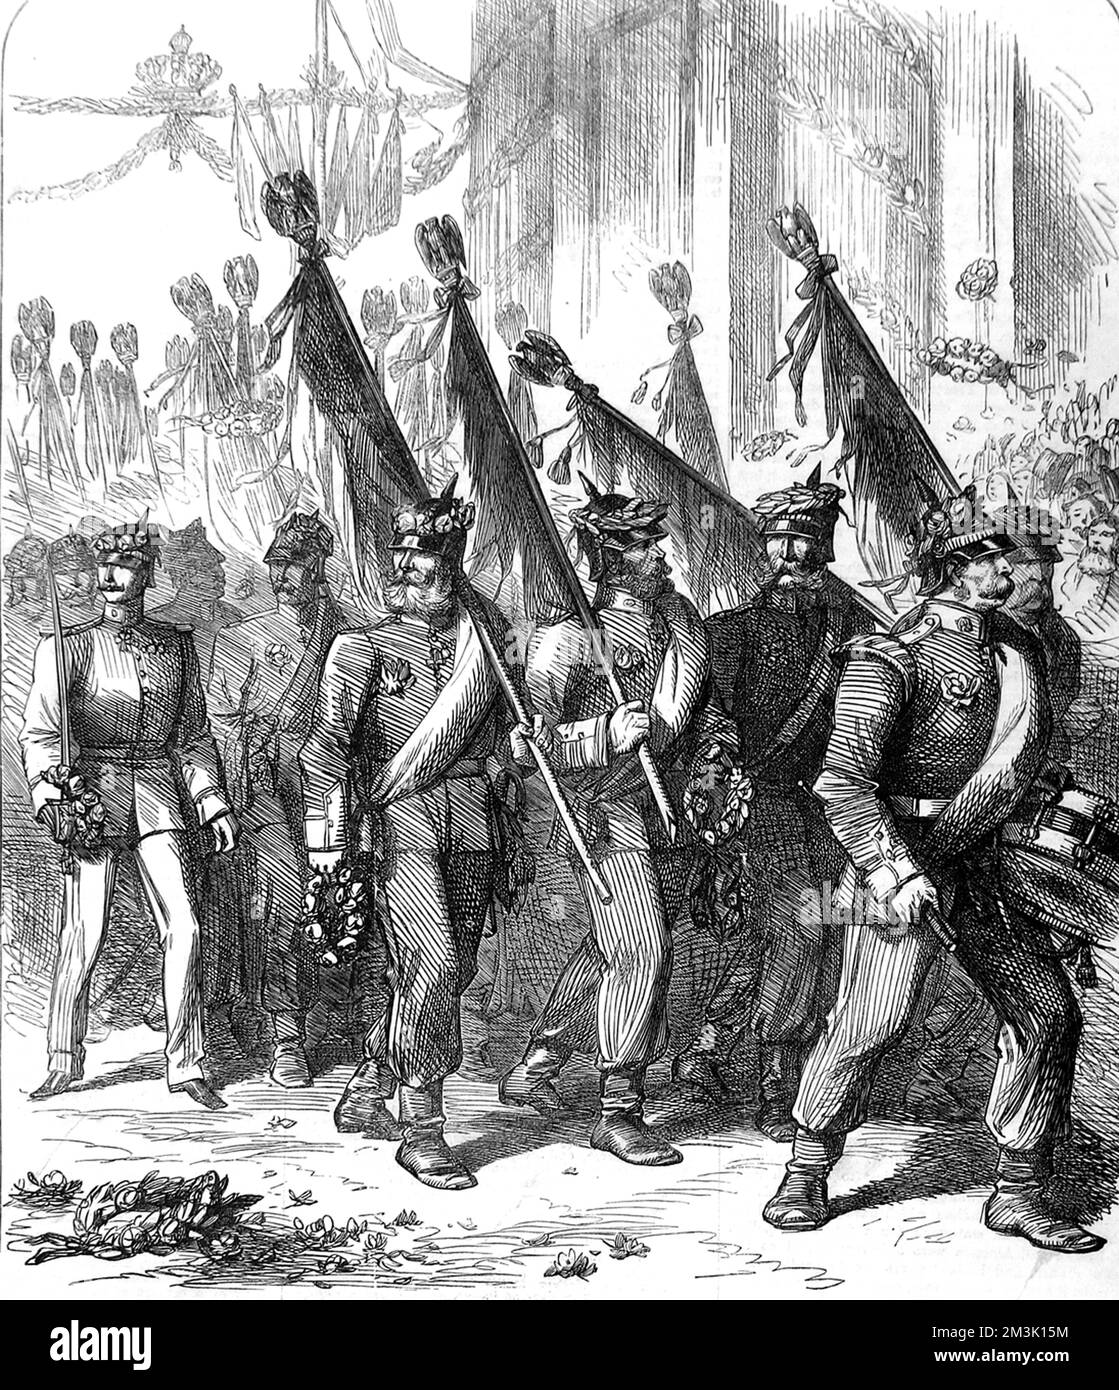 Prussian Troops return to Berlin victorious at the end of the Franco-Prussian War.     Date: 1871 Stock Photo